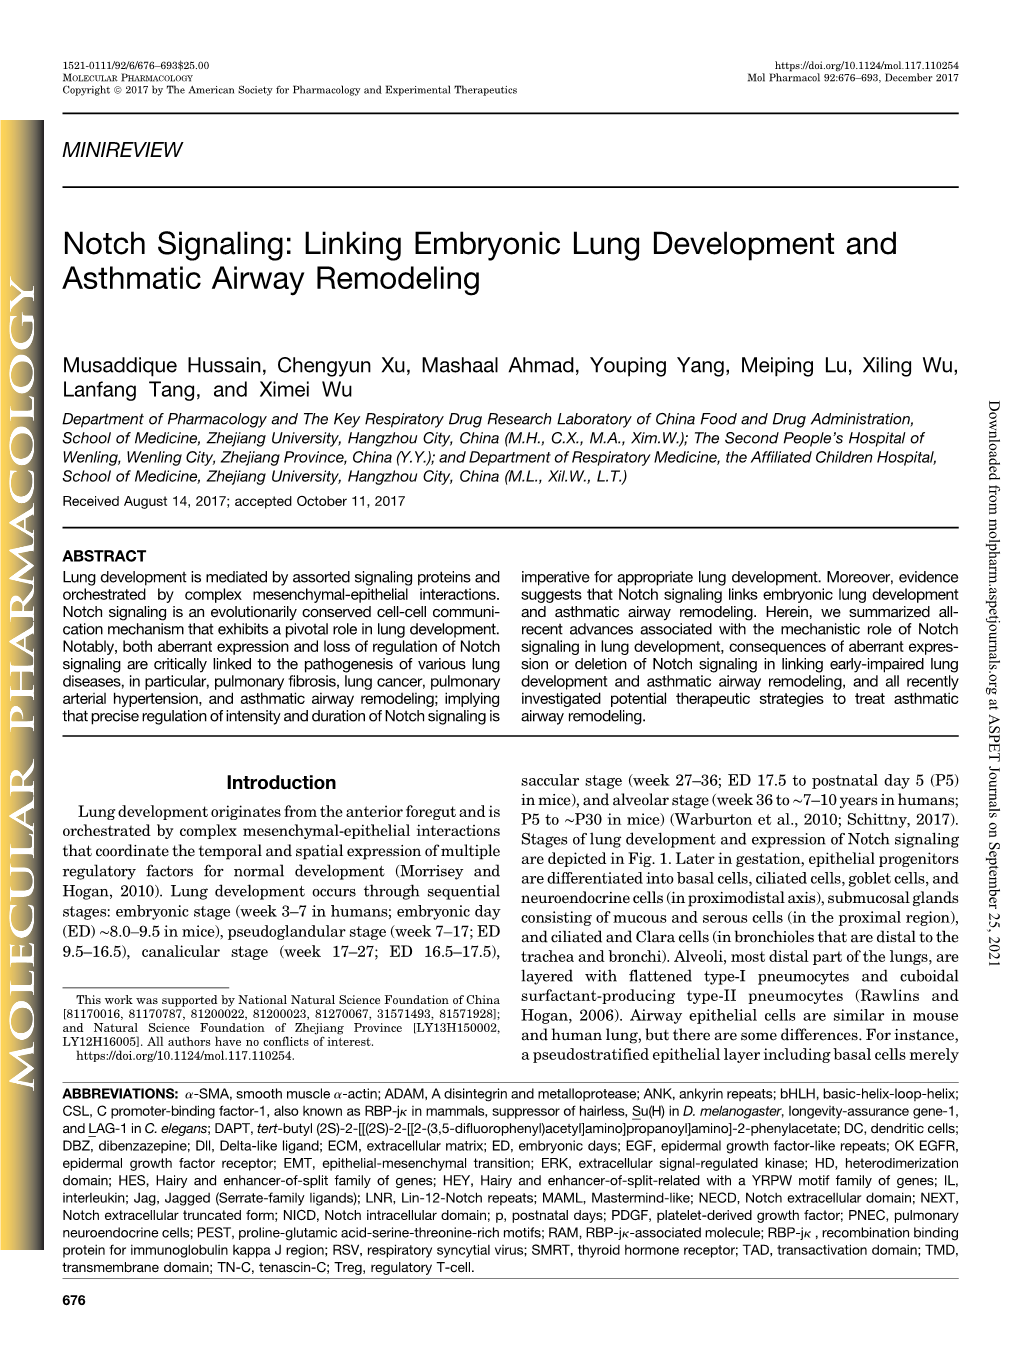 Notch Signaling: Linking Embryonic Lung Development and Asthmatic Airway Remodeling